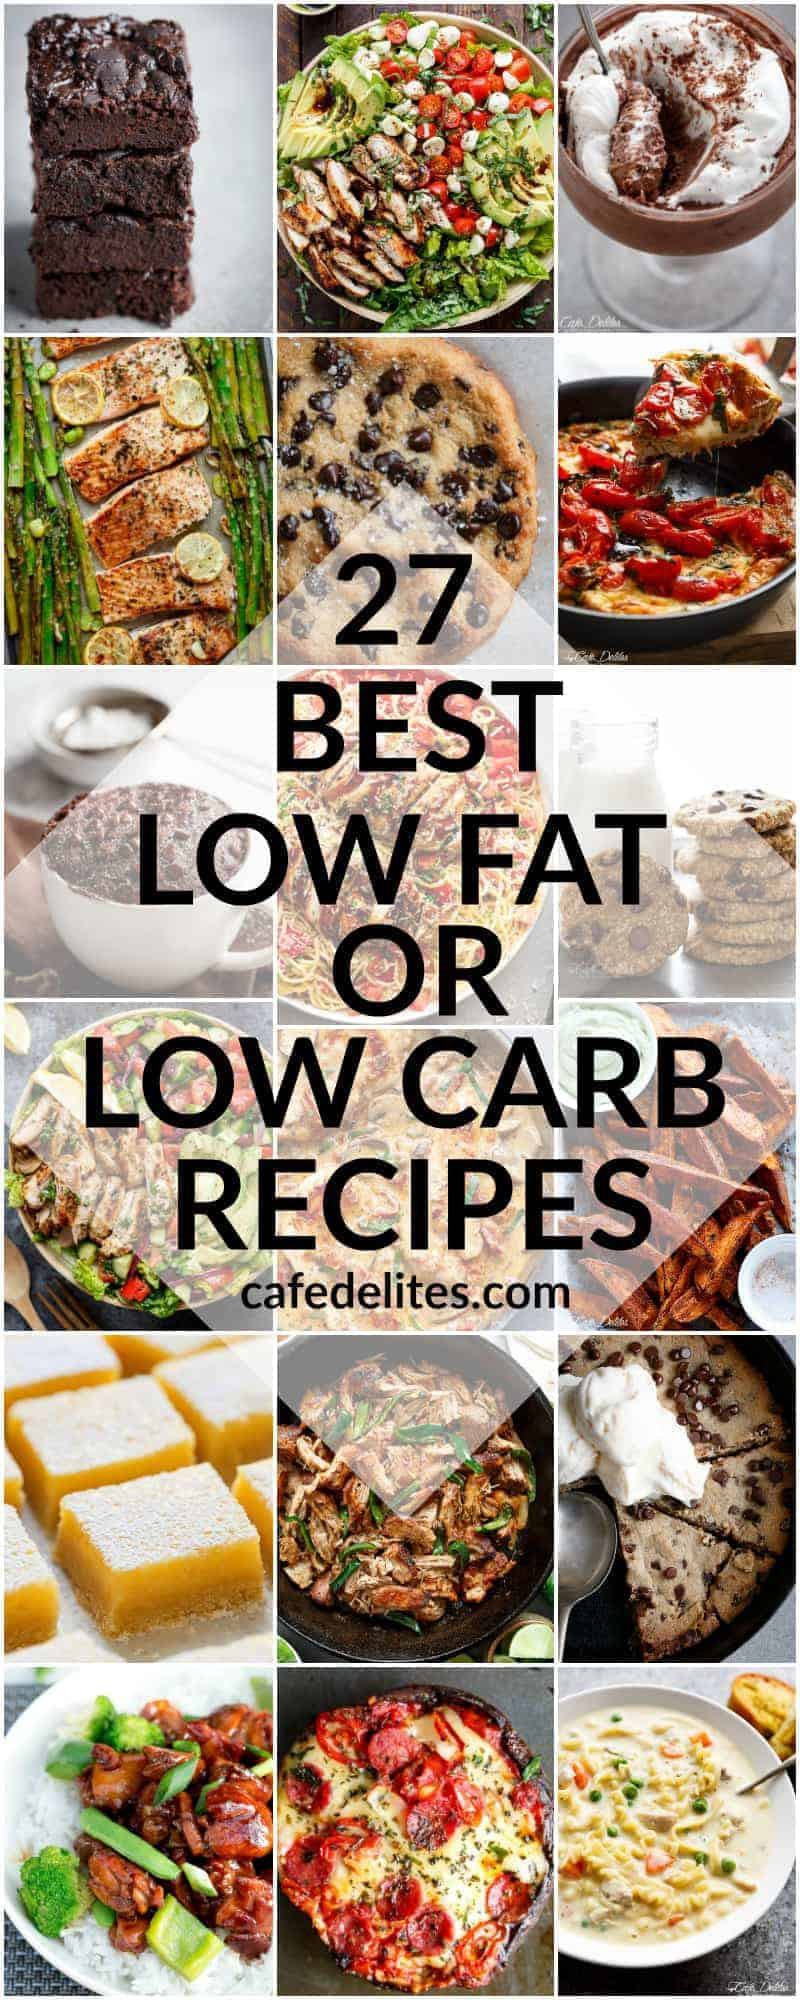 Low Carb Low Cholesterol Recipes
 27 BEST LOW FAT & LOW CARB RECIPES FOR 2017 Cafe Delites